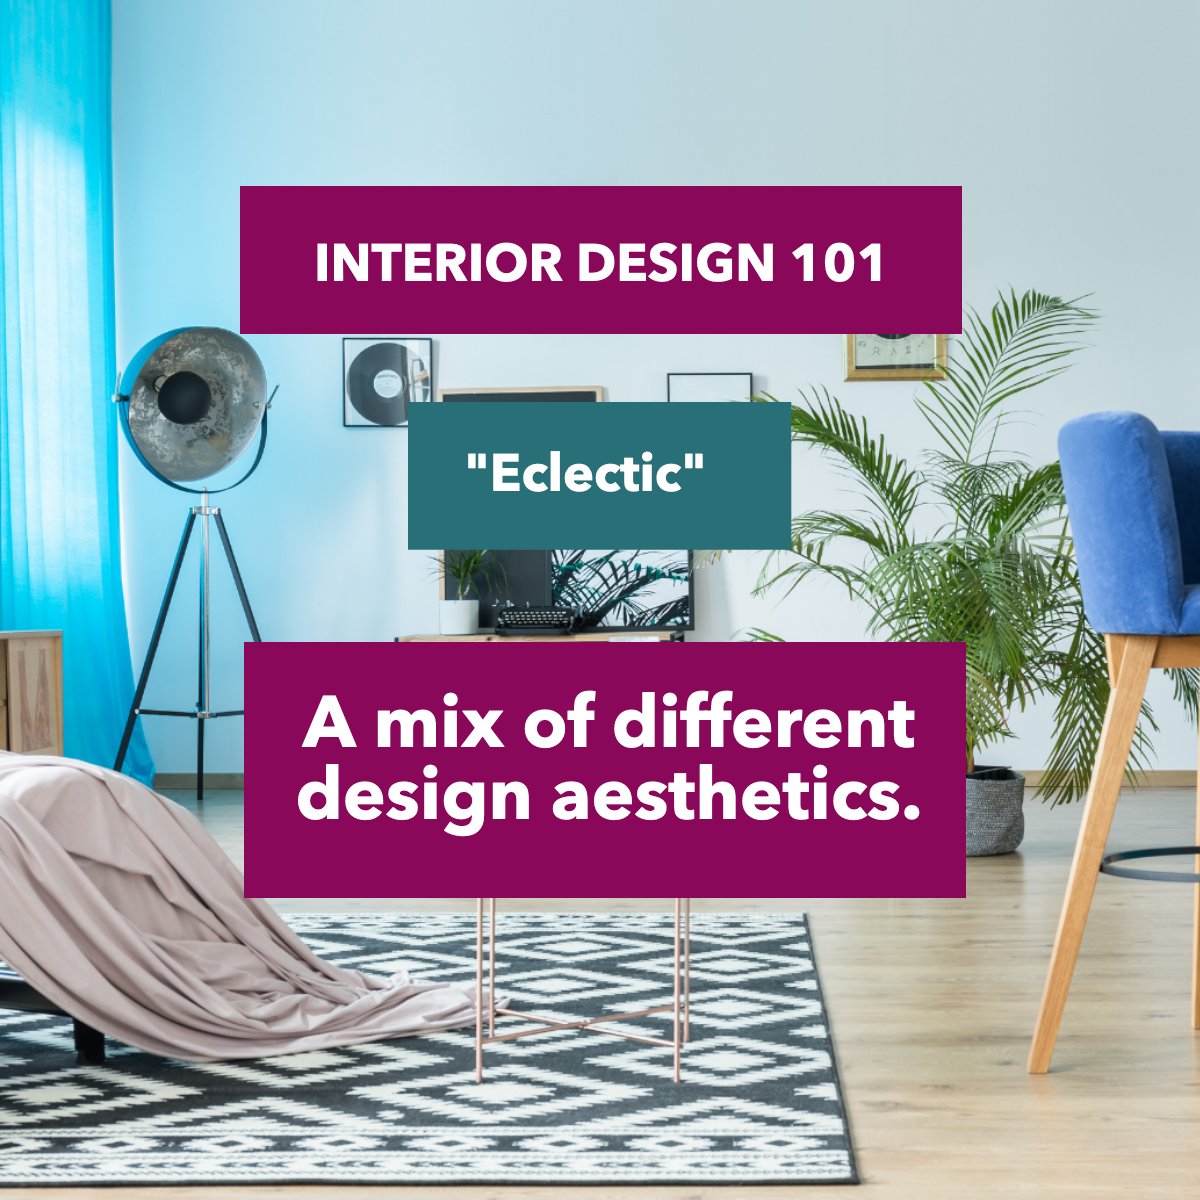 Interior Design 101

'Eclectic' 

A mix of different design aesthetics. 

#interiorsdesign #interiortrends #interiordesigning #interiordesigntrends #interiorsaddict #interiordesigntips #interiordesigngoals